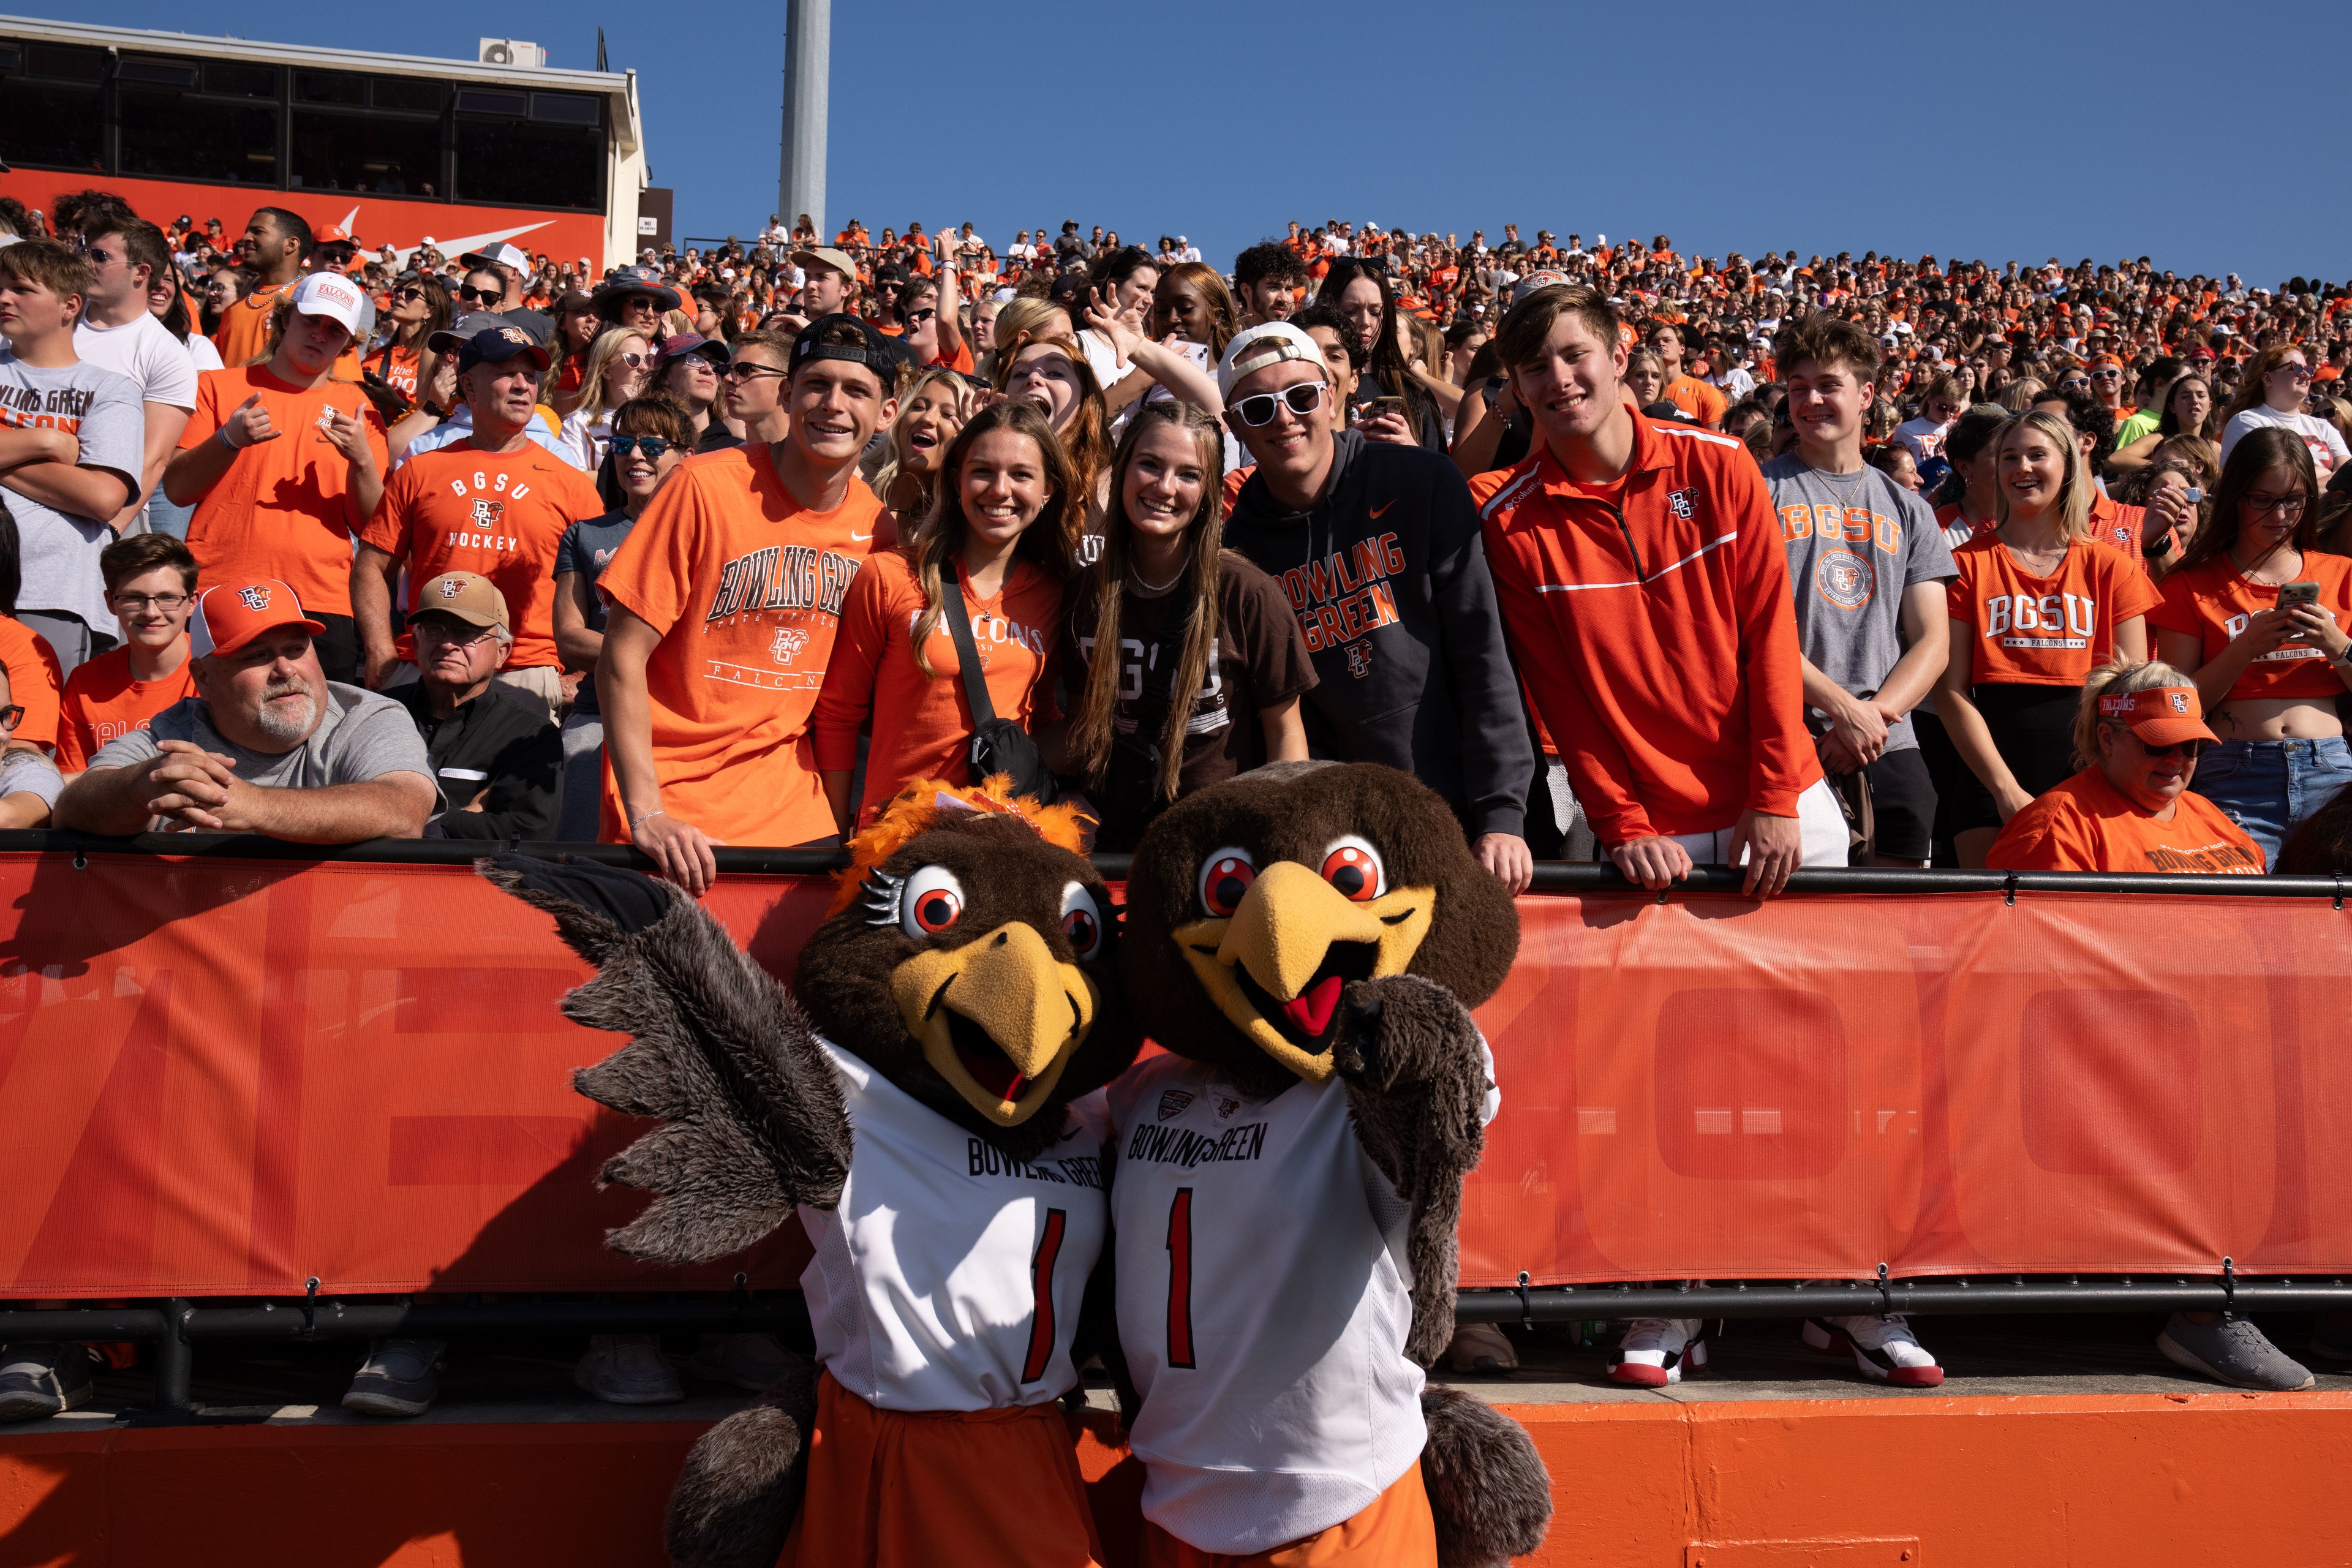 BGSU student section at Doyt L. Perry Stadium 